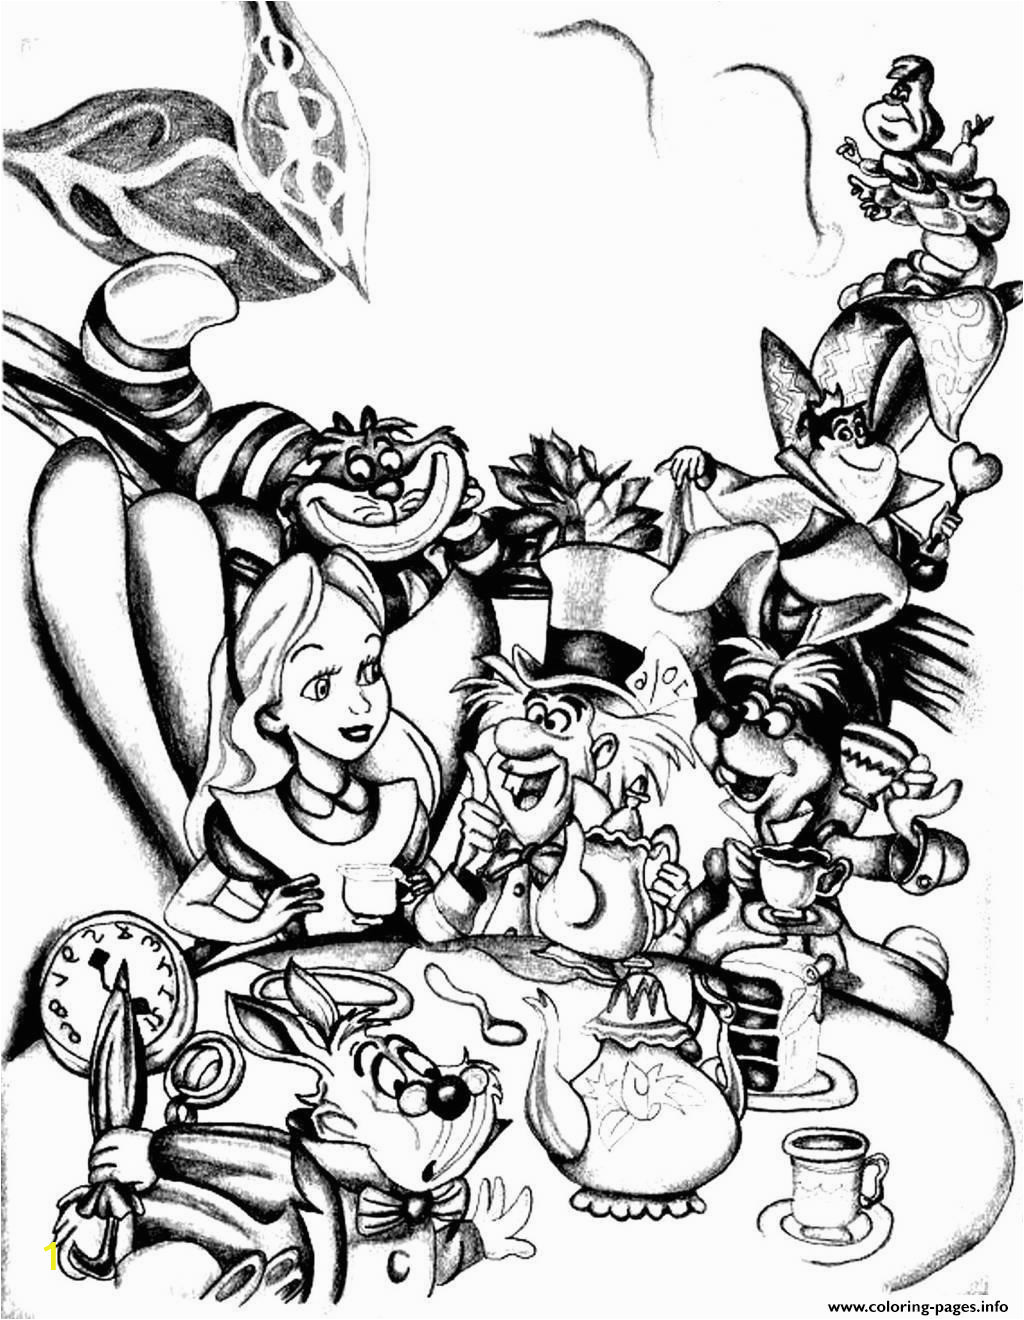 Alice In Wonderland Trippy Coloring Pages Trippy Alice In Wonderland Coloring Pages at Getdrawings